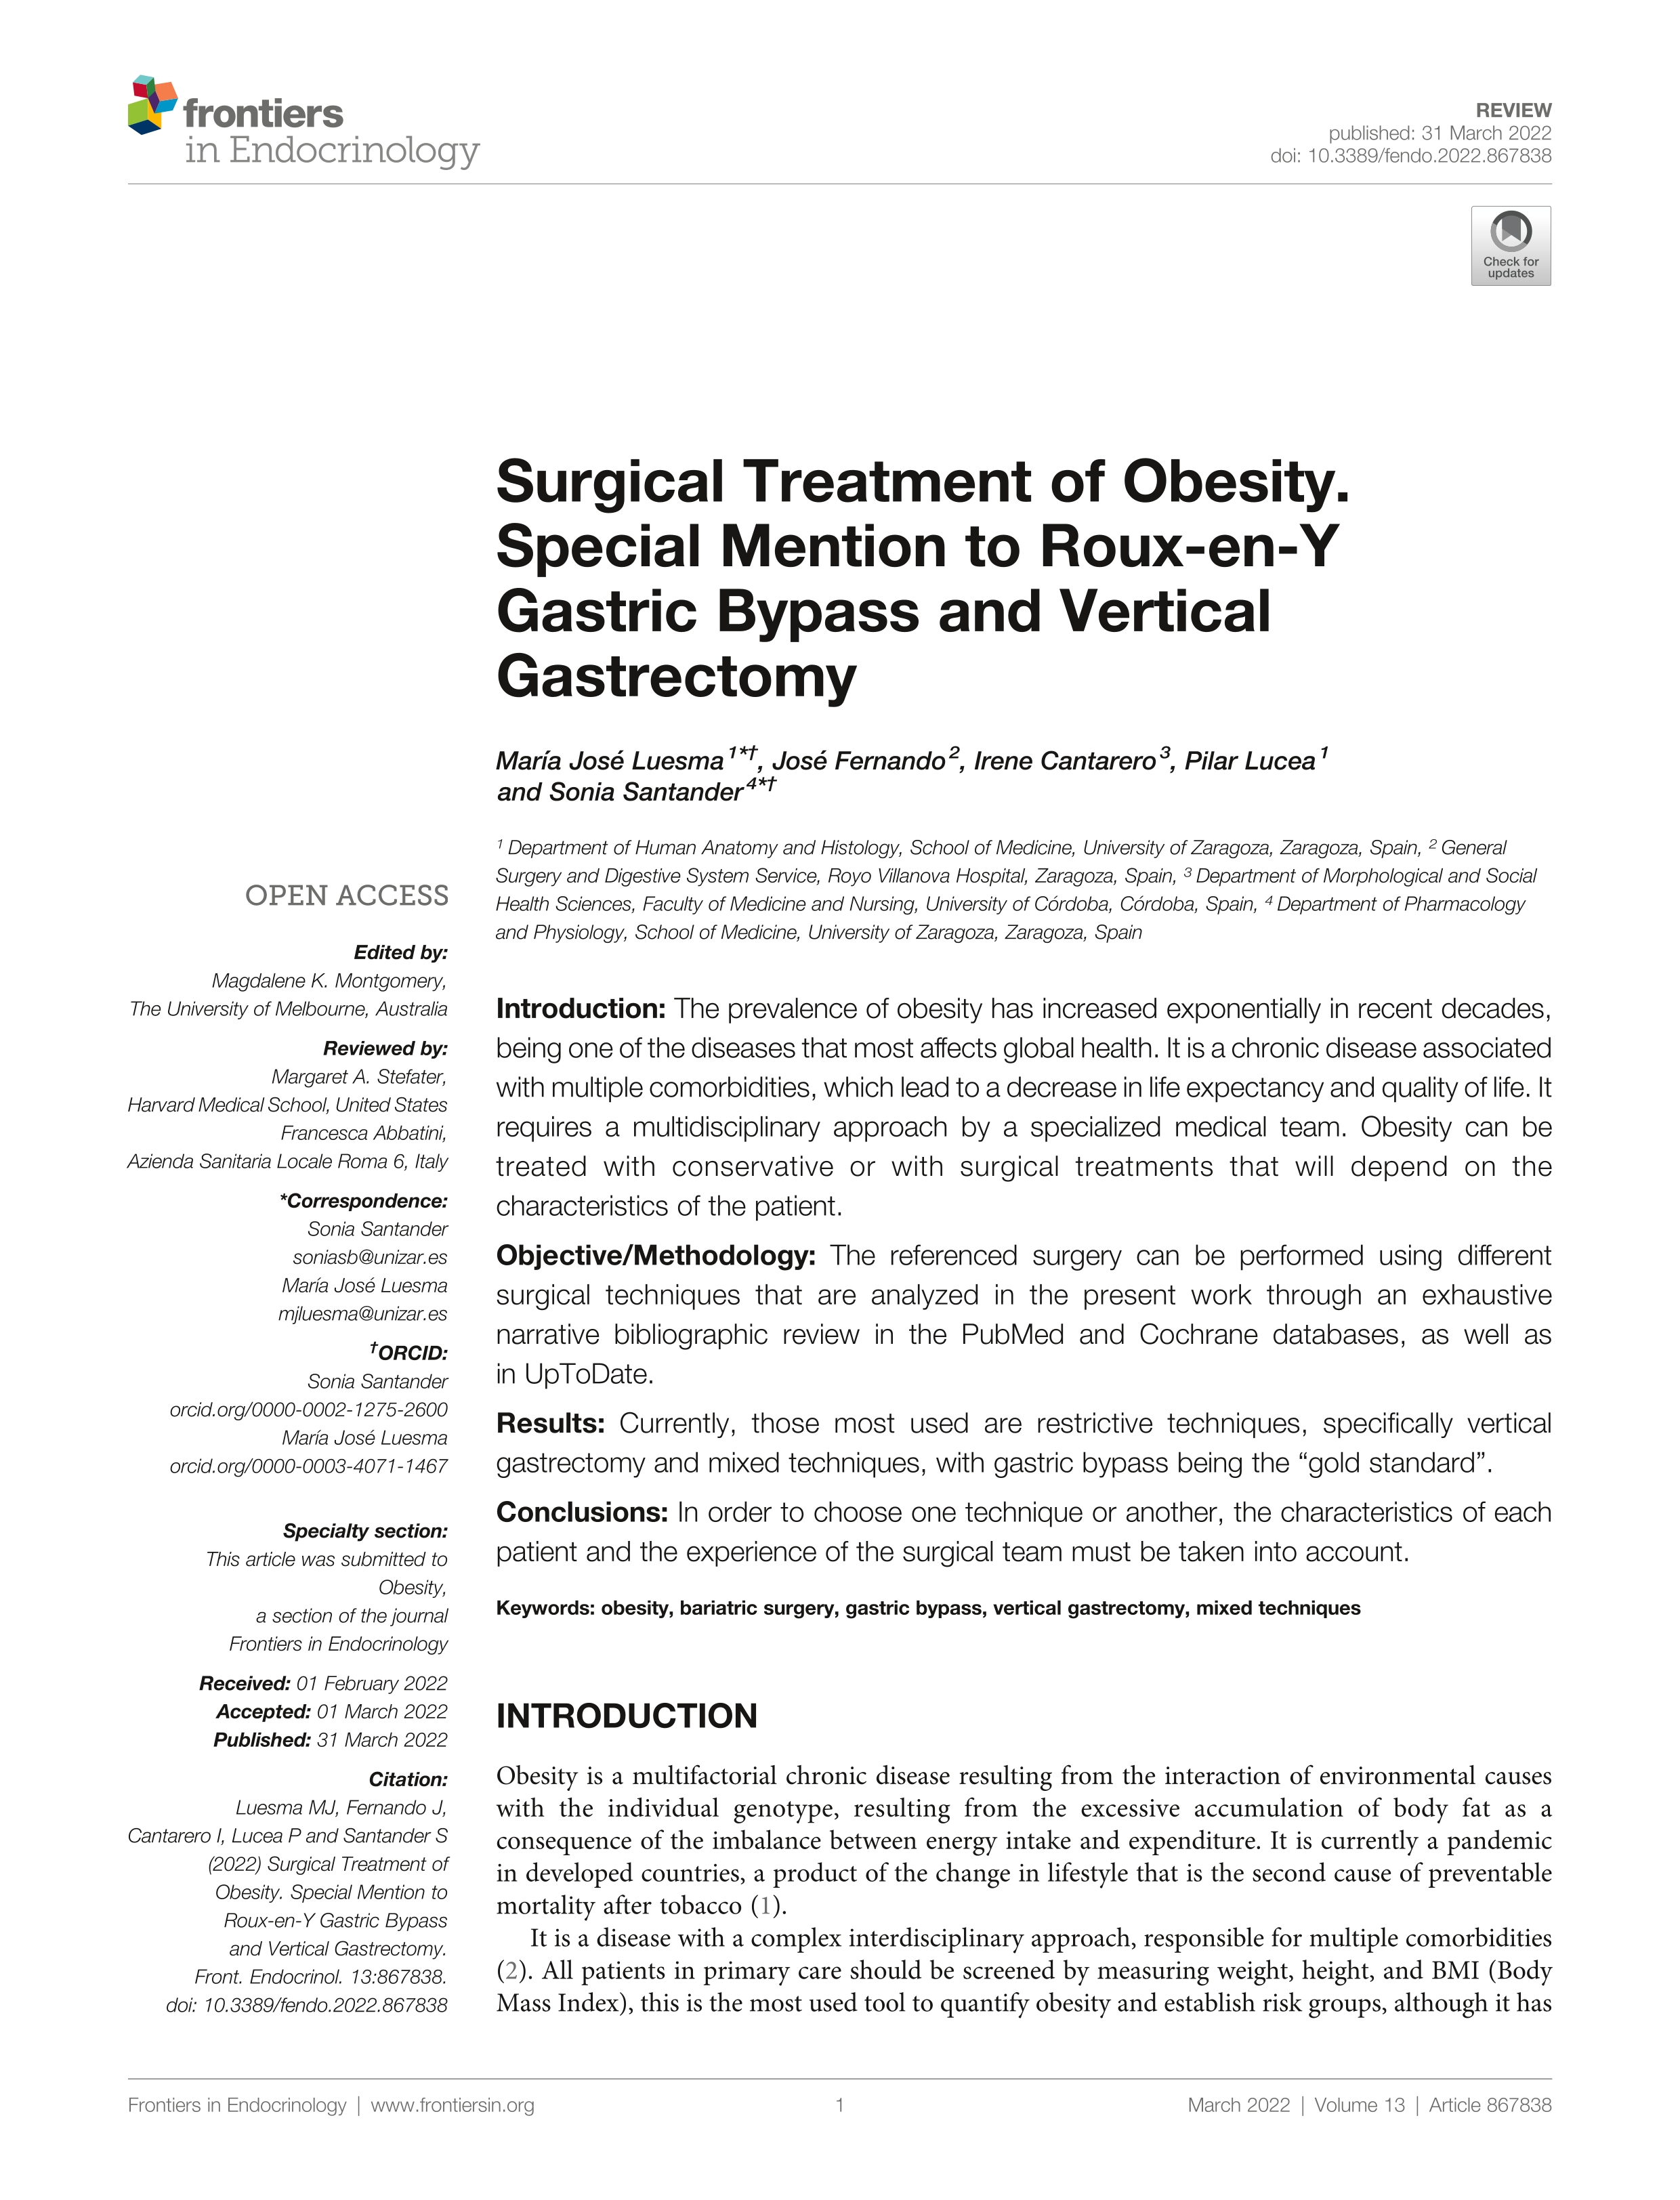 Surgical Treatment of Obesity. Special Mention to Roux-en-Y Gastric Bypass and Vertical Gastrectomy